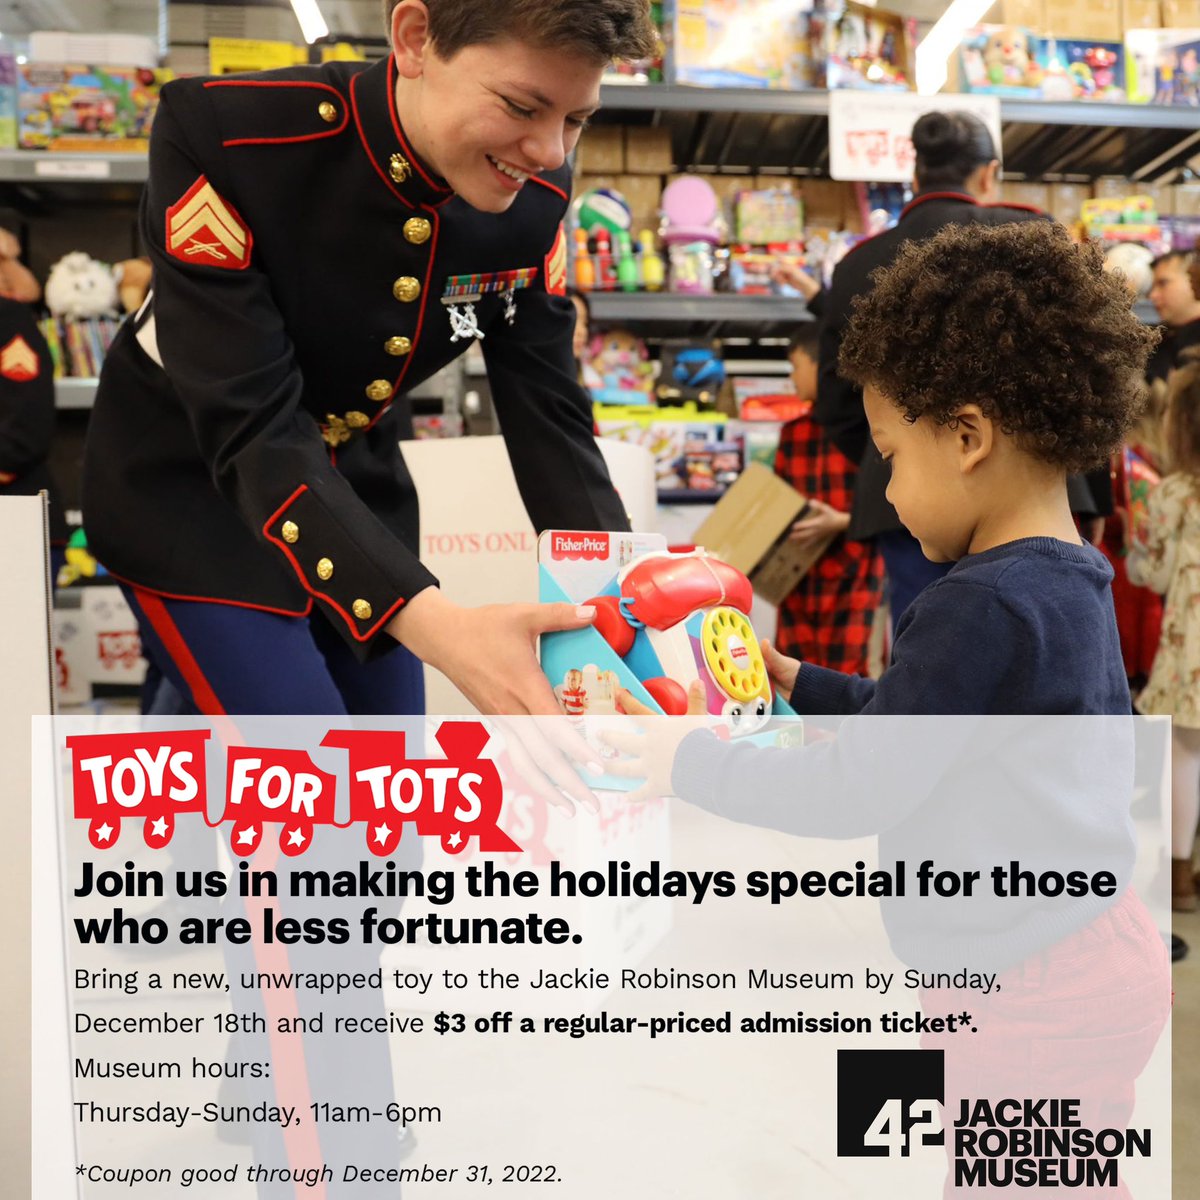 Proud to support @ToysForTots_USA and their 832 Coordinators who worked tirelessly to deliver over 22.4 million toys, books, and games to nearly 8.8 million children this past year. Stop by the Jackie Robinson Museum and spread a bit of holiday cheer 🌲